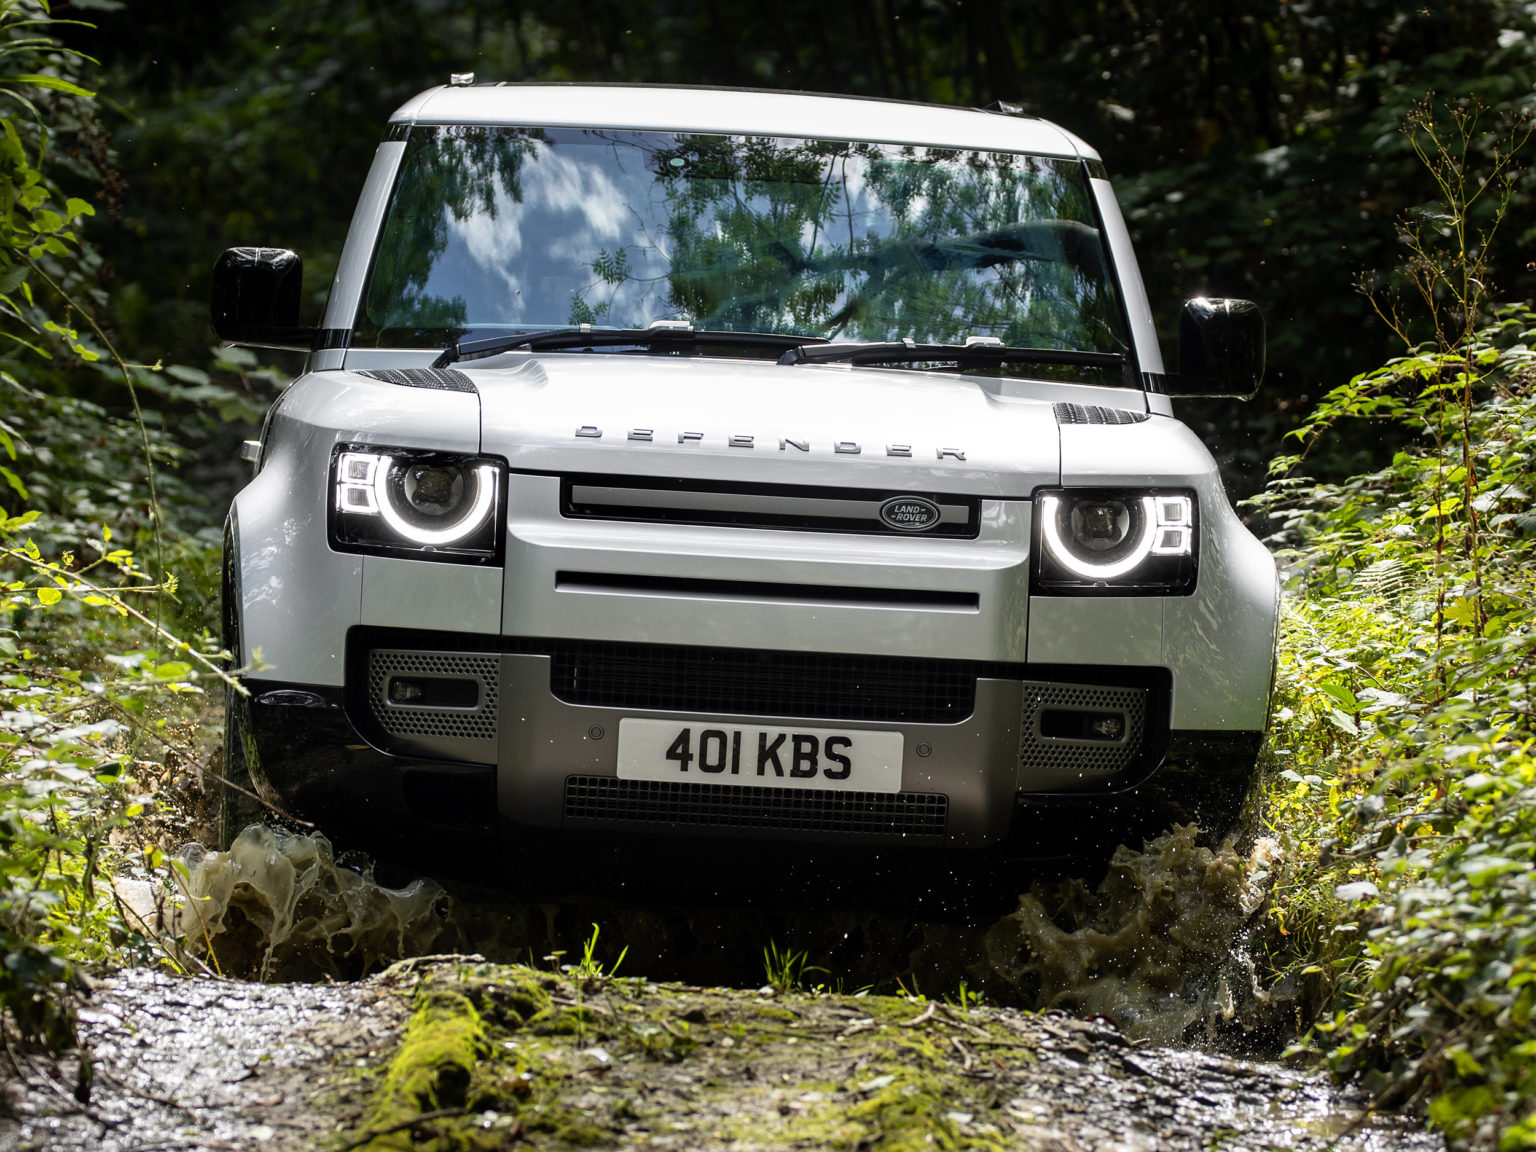 Land Rover is offering the 2021 Defender 90 and 110 in a new grade.